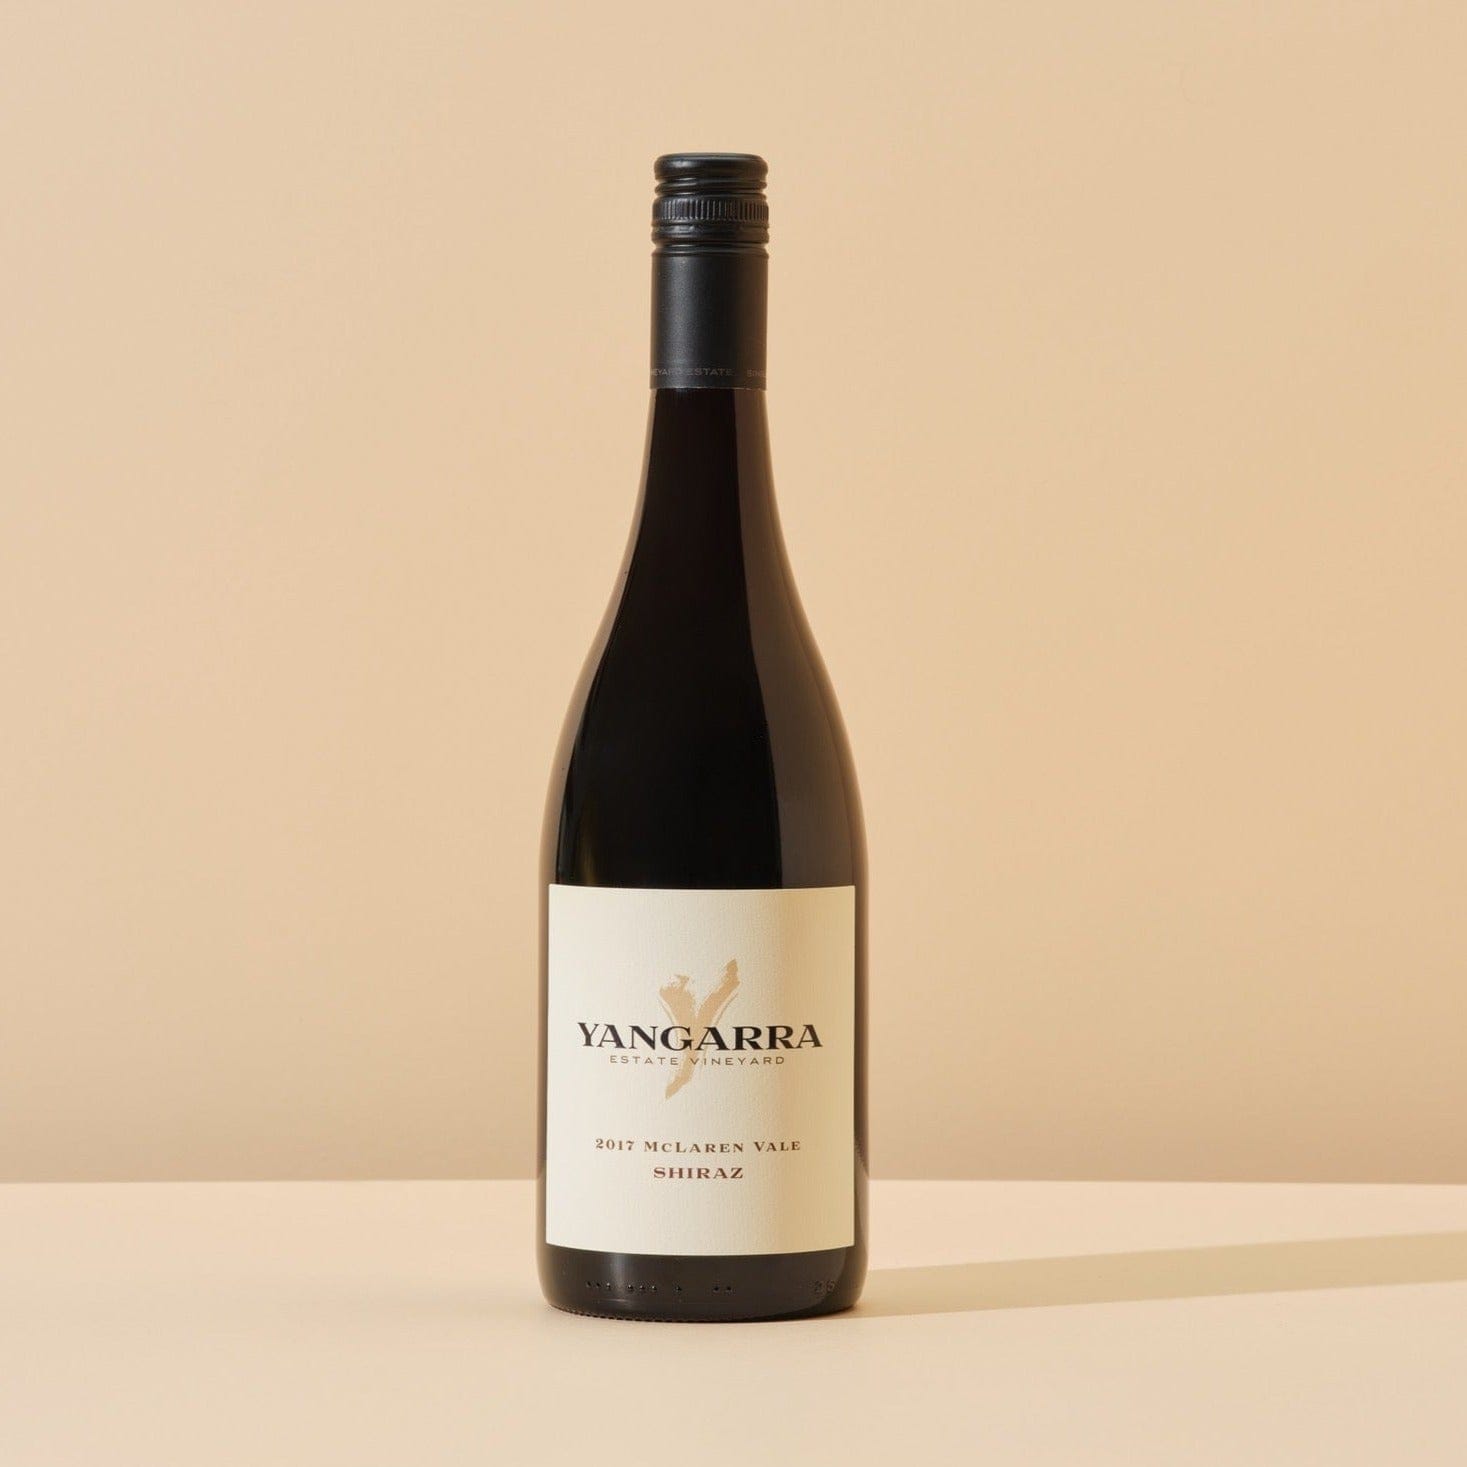 This image features Yangarra 2019 Shiraz, gifted in Handsel's 'Par None' bundle. Image is photographed with a natural background